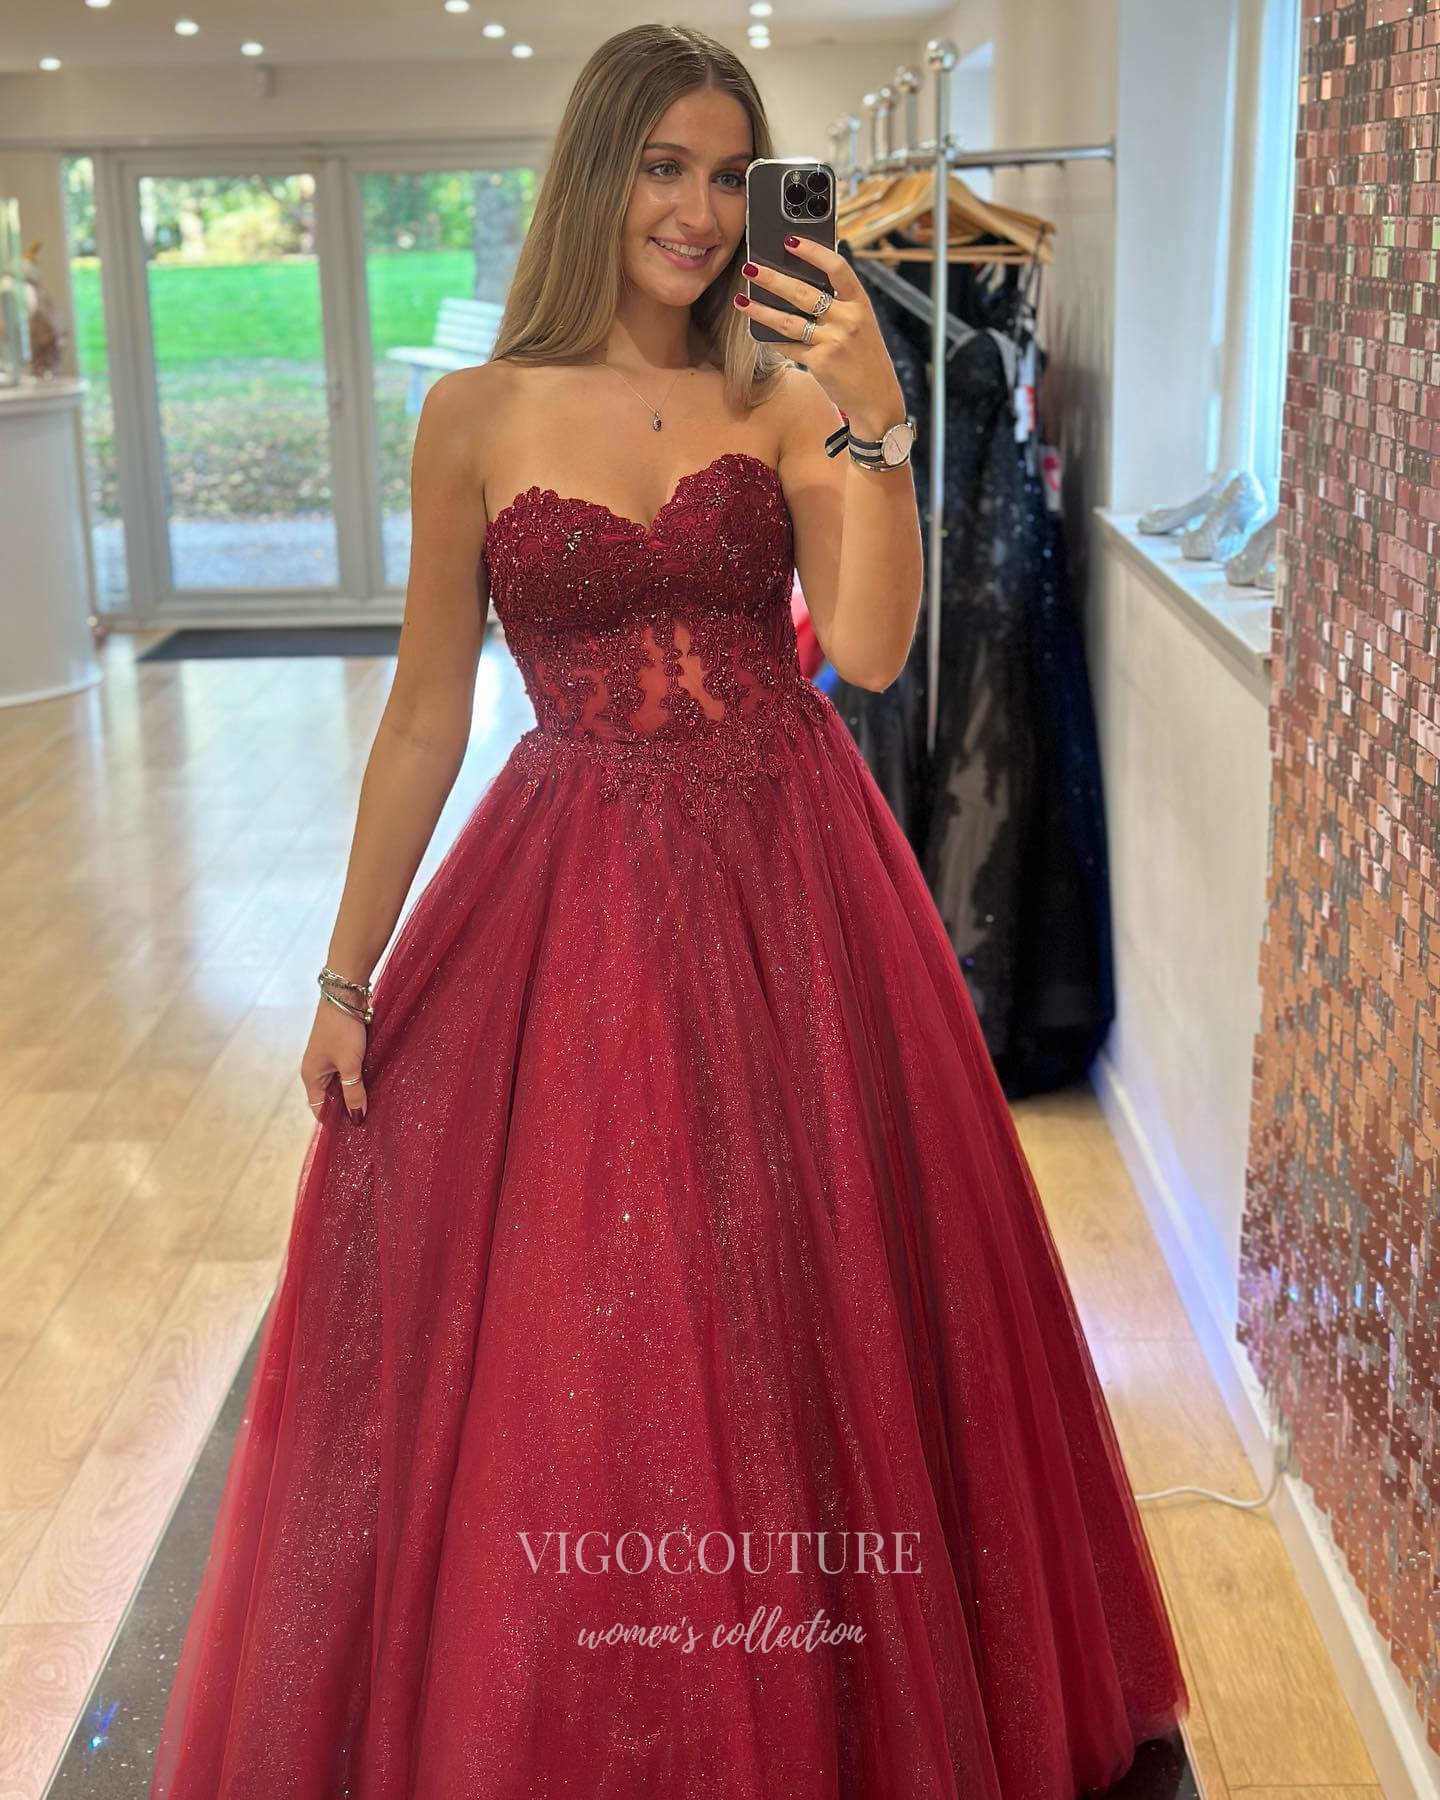 Green Lace Applique Prom Dresses Sparkly Tulle Strapless Evening Dress 21992-Prom Dresses-vigocouture-Burgundy-US2-vigocouture